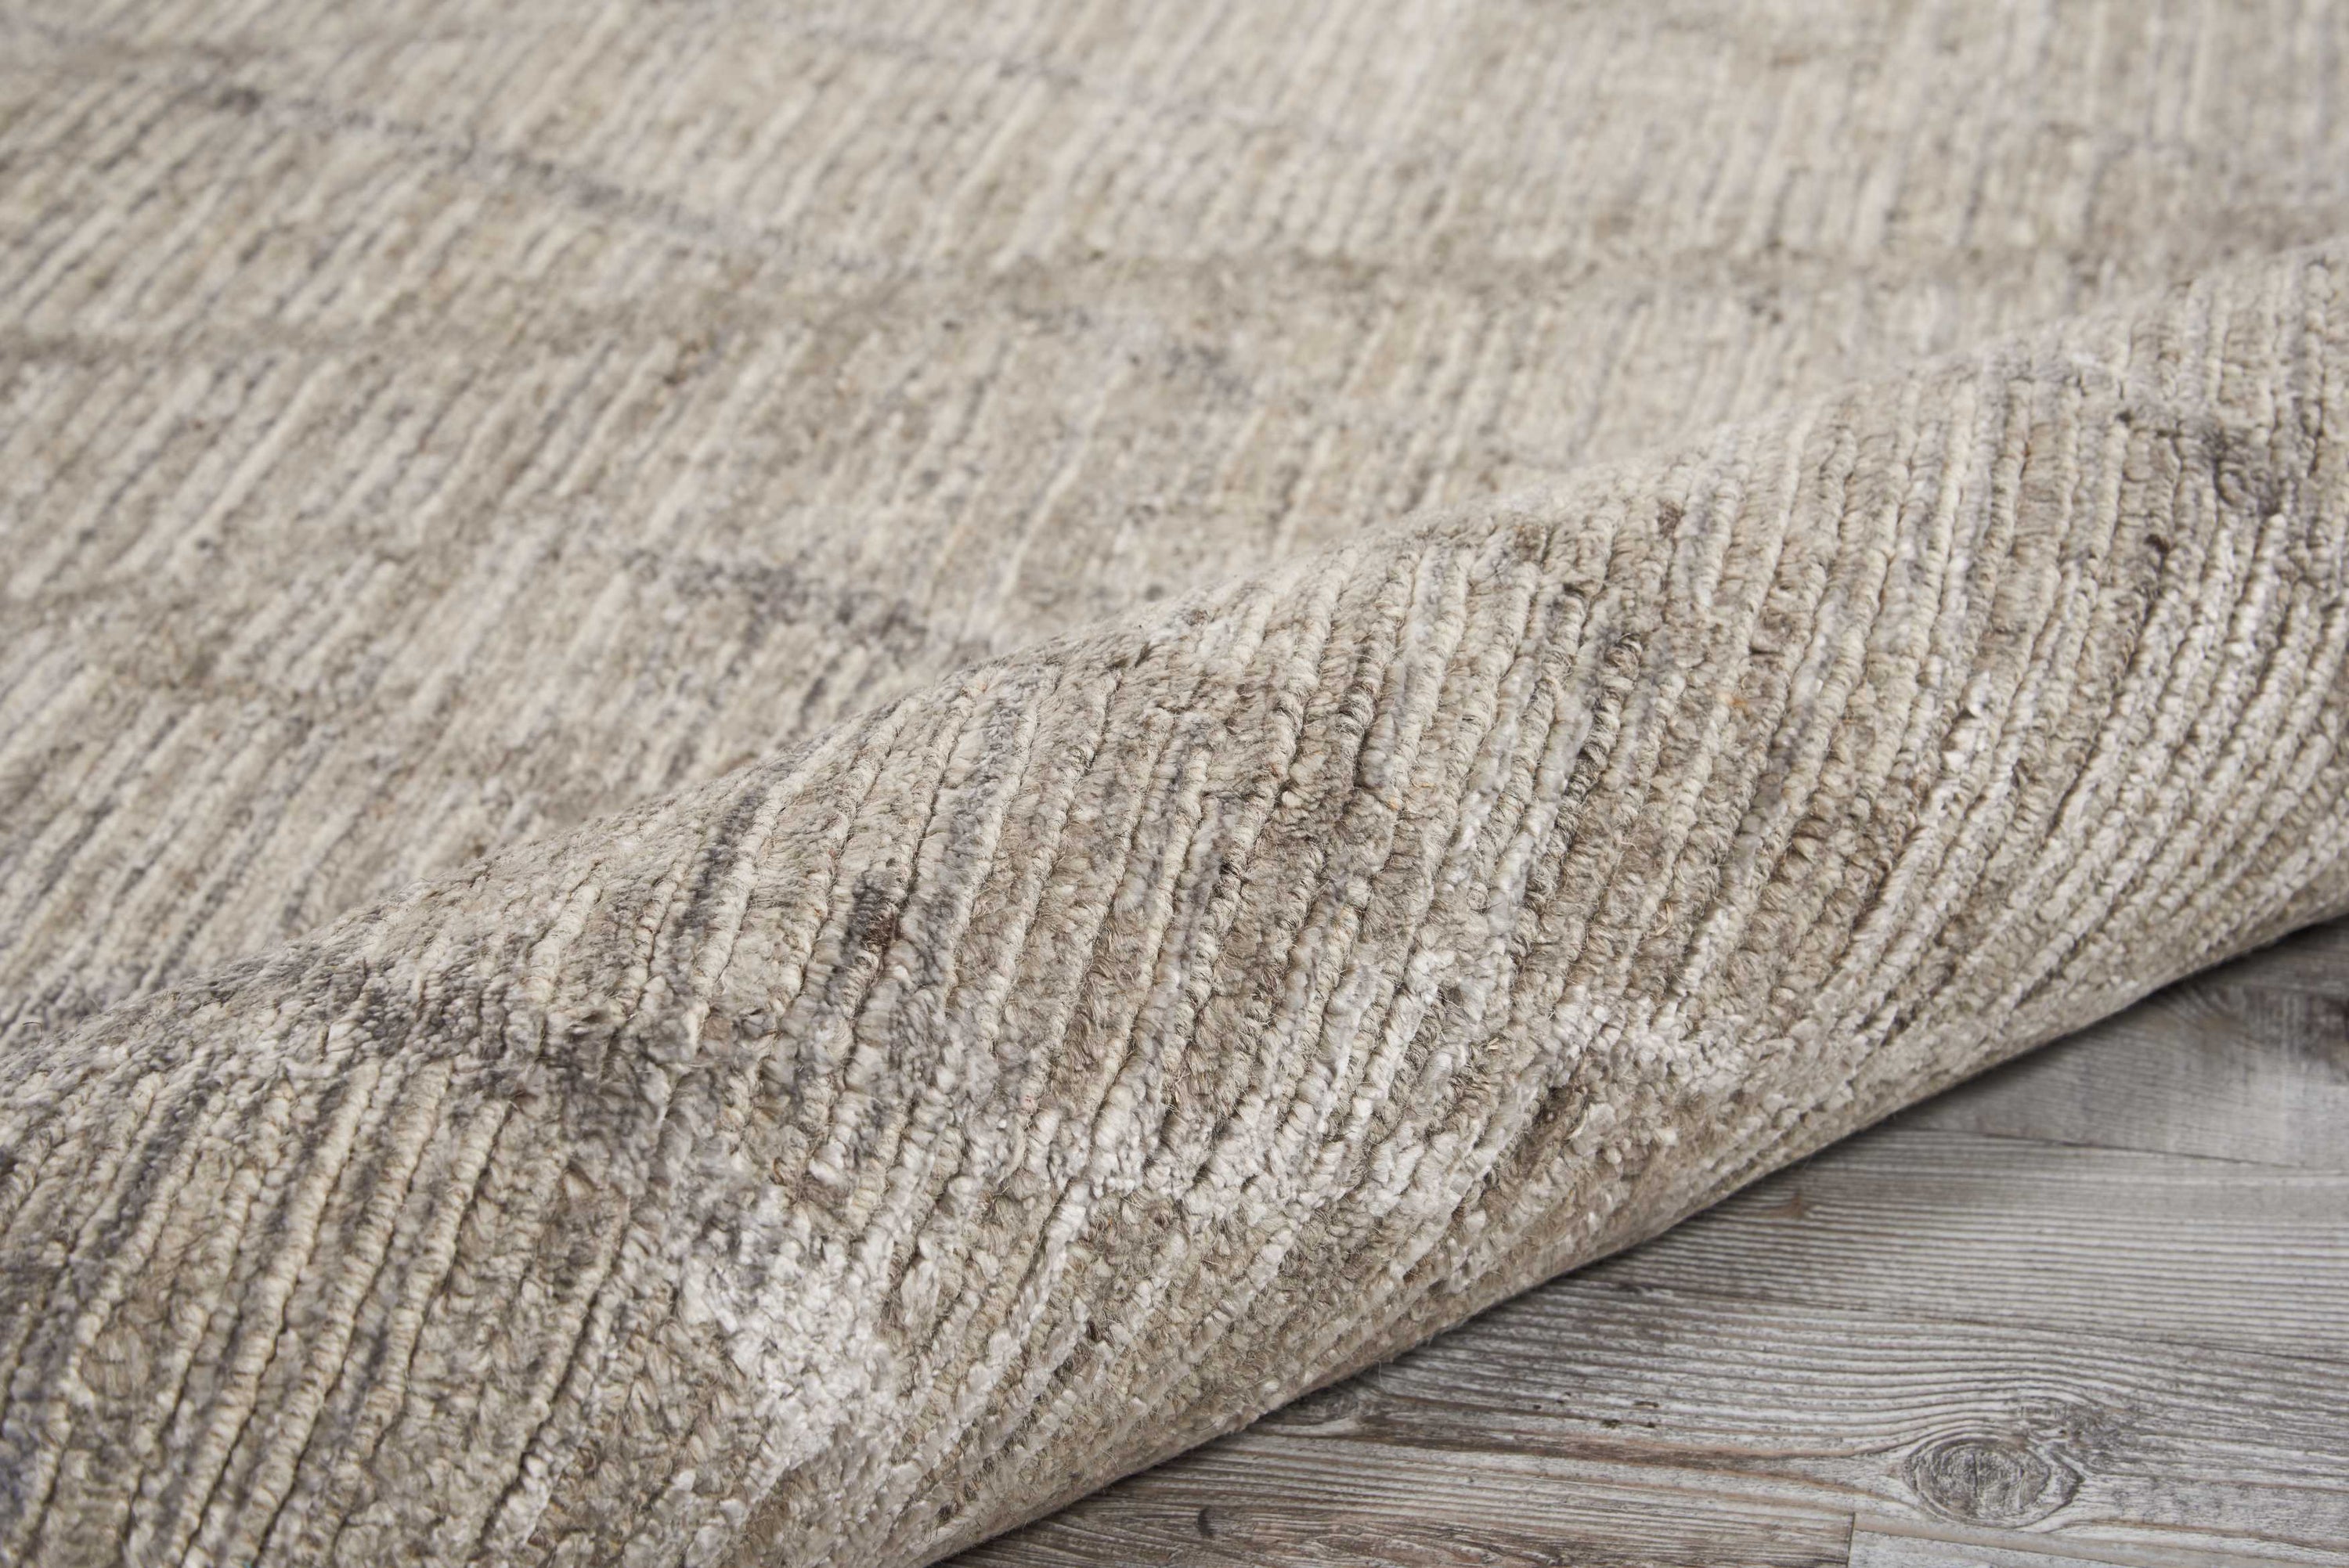 Close-up of textured fabric rug on rustic wooden floor.